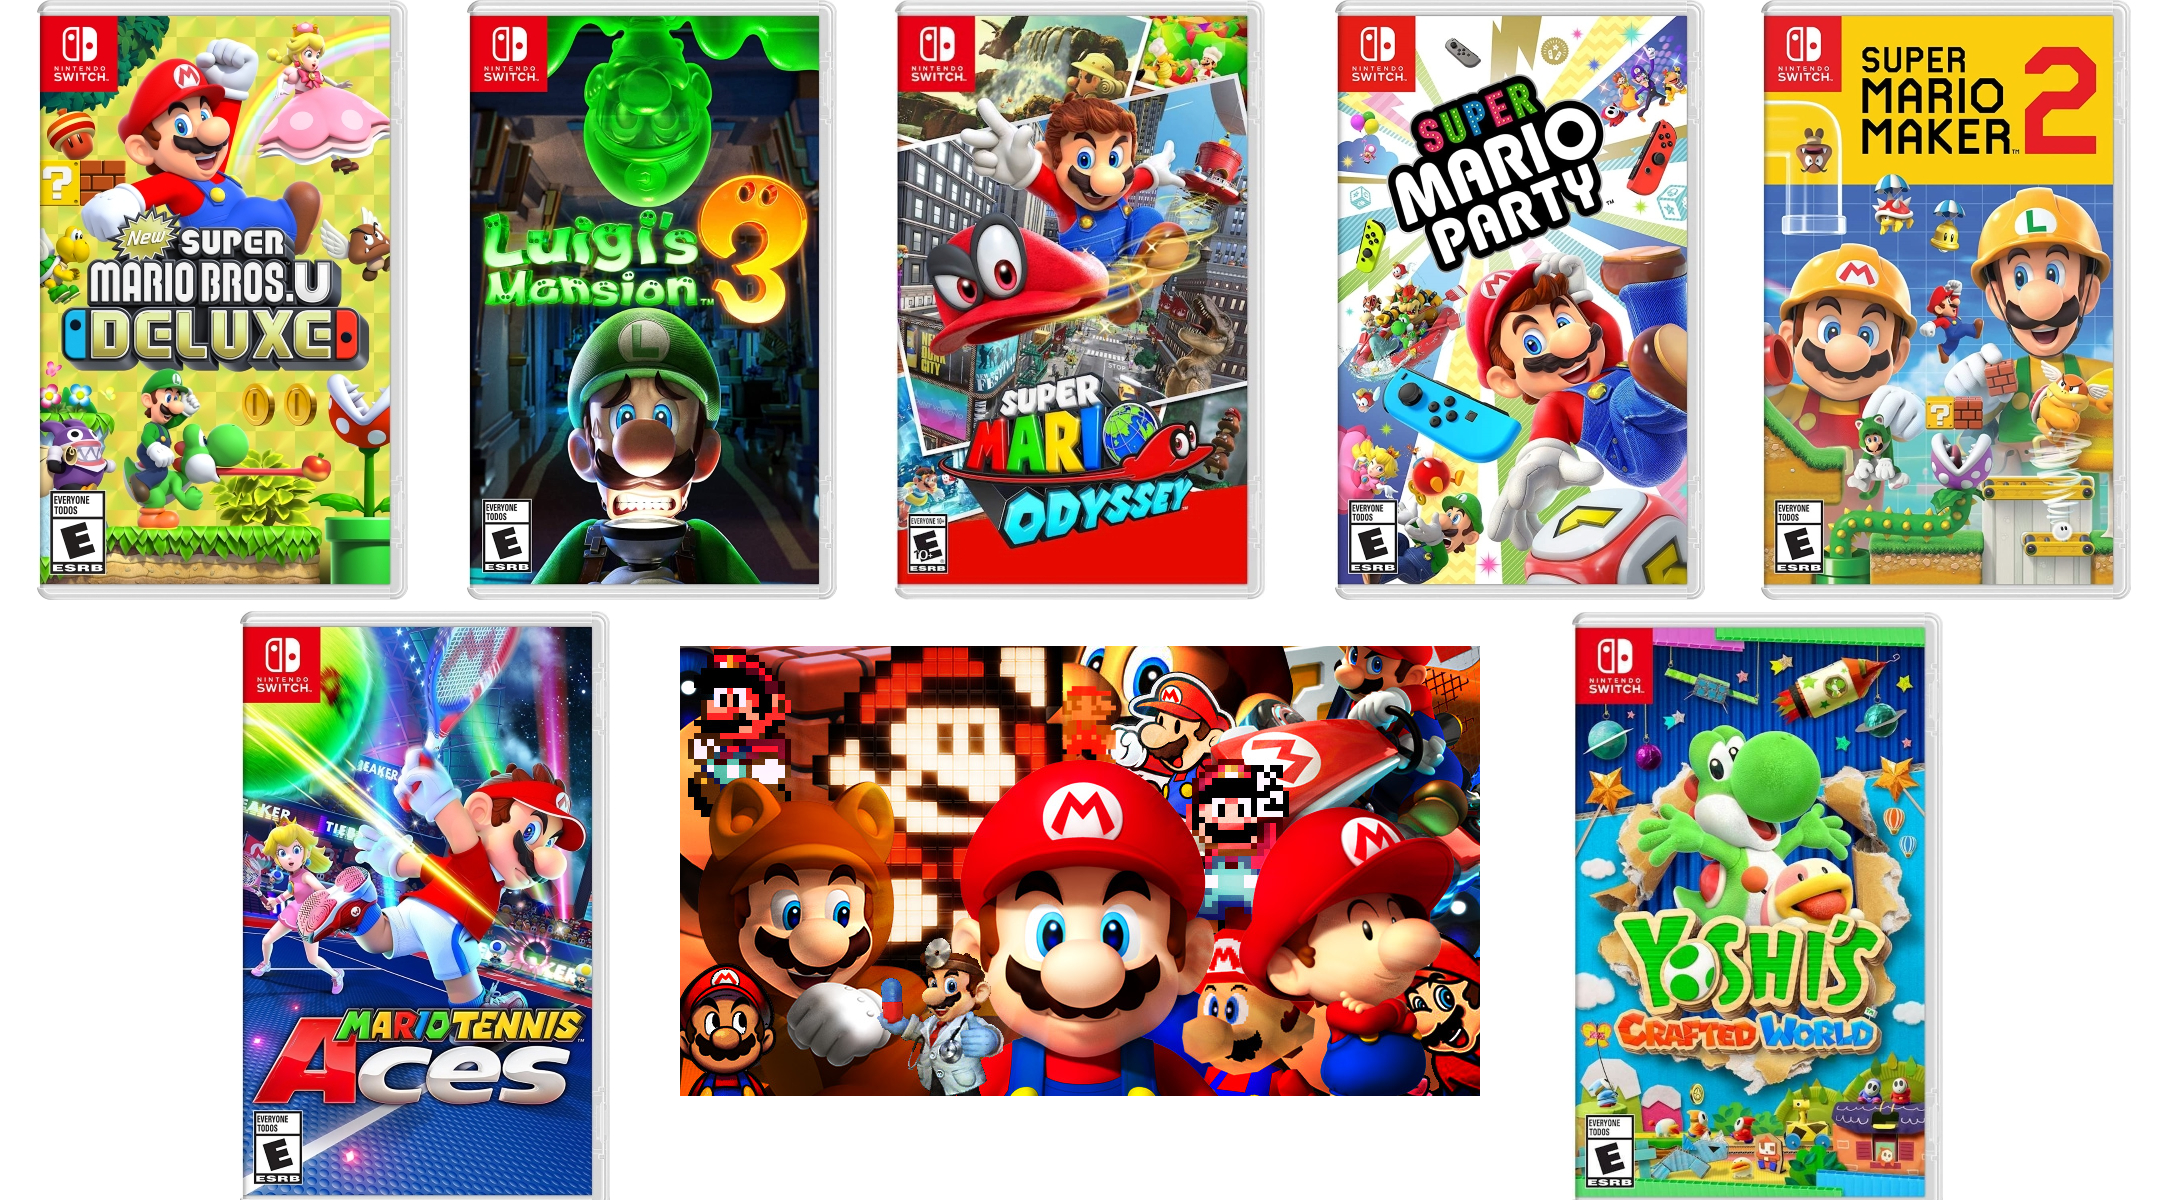 evenwicht Ringlet Humaan Mario Day 2021 sales discount several Mario games for Nintendo Switch | Ars  Technica